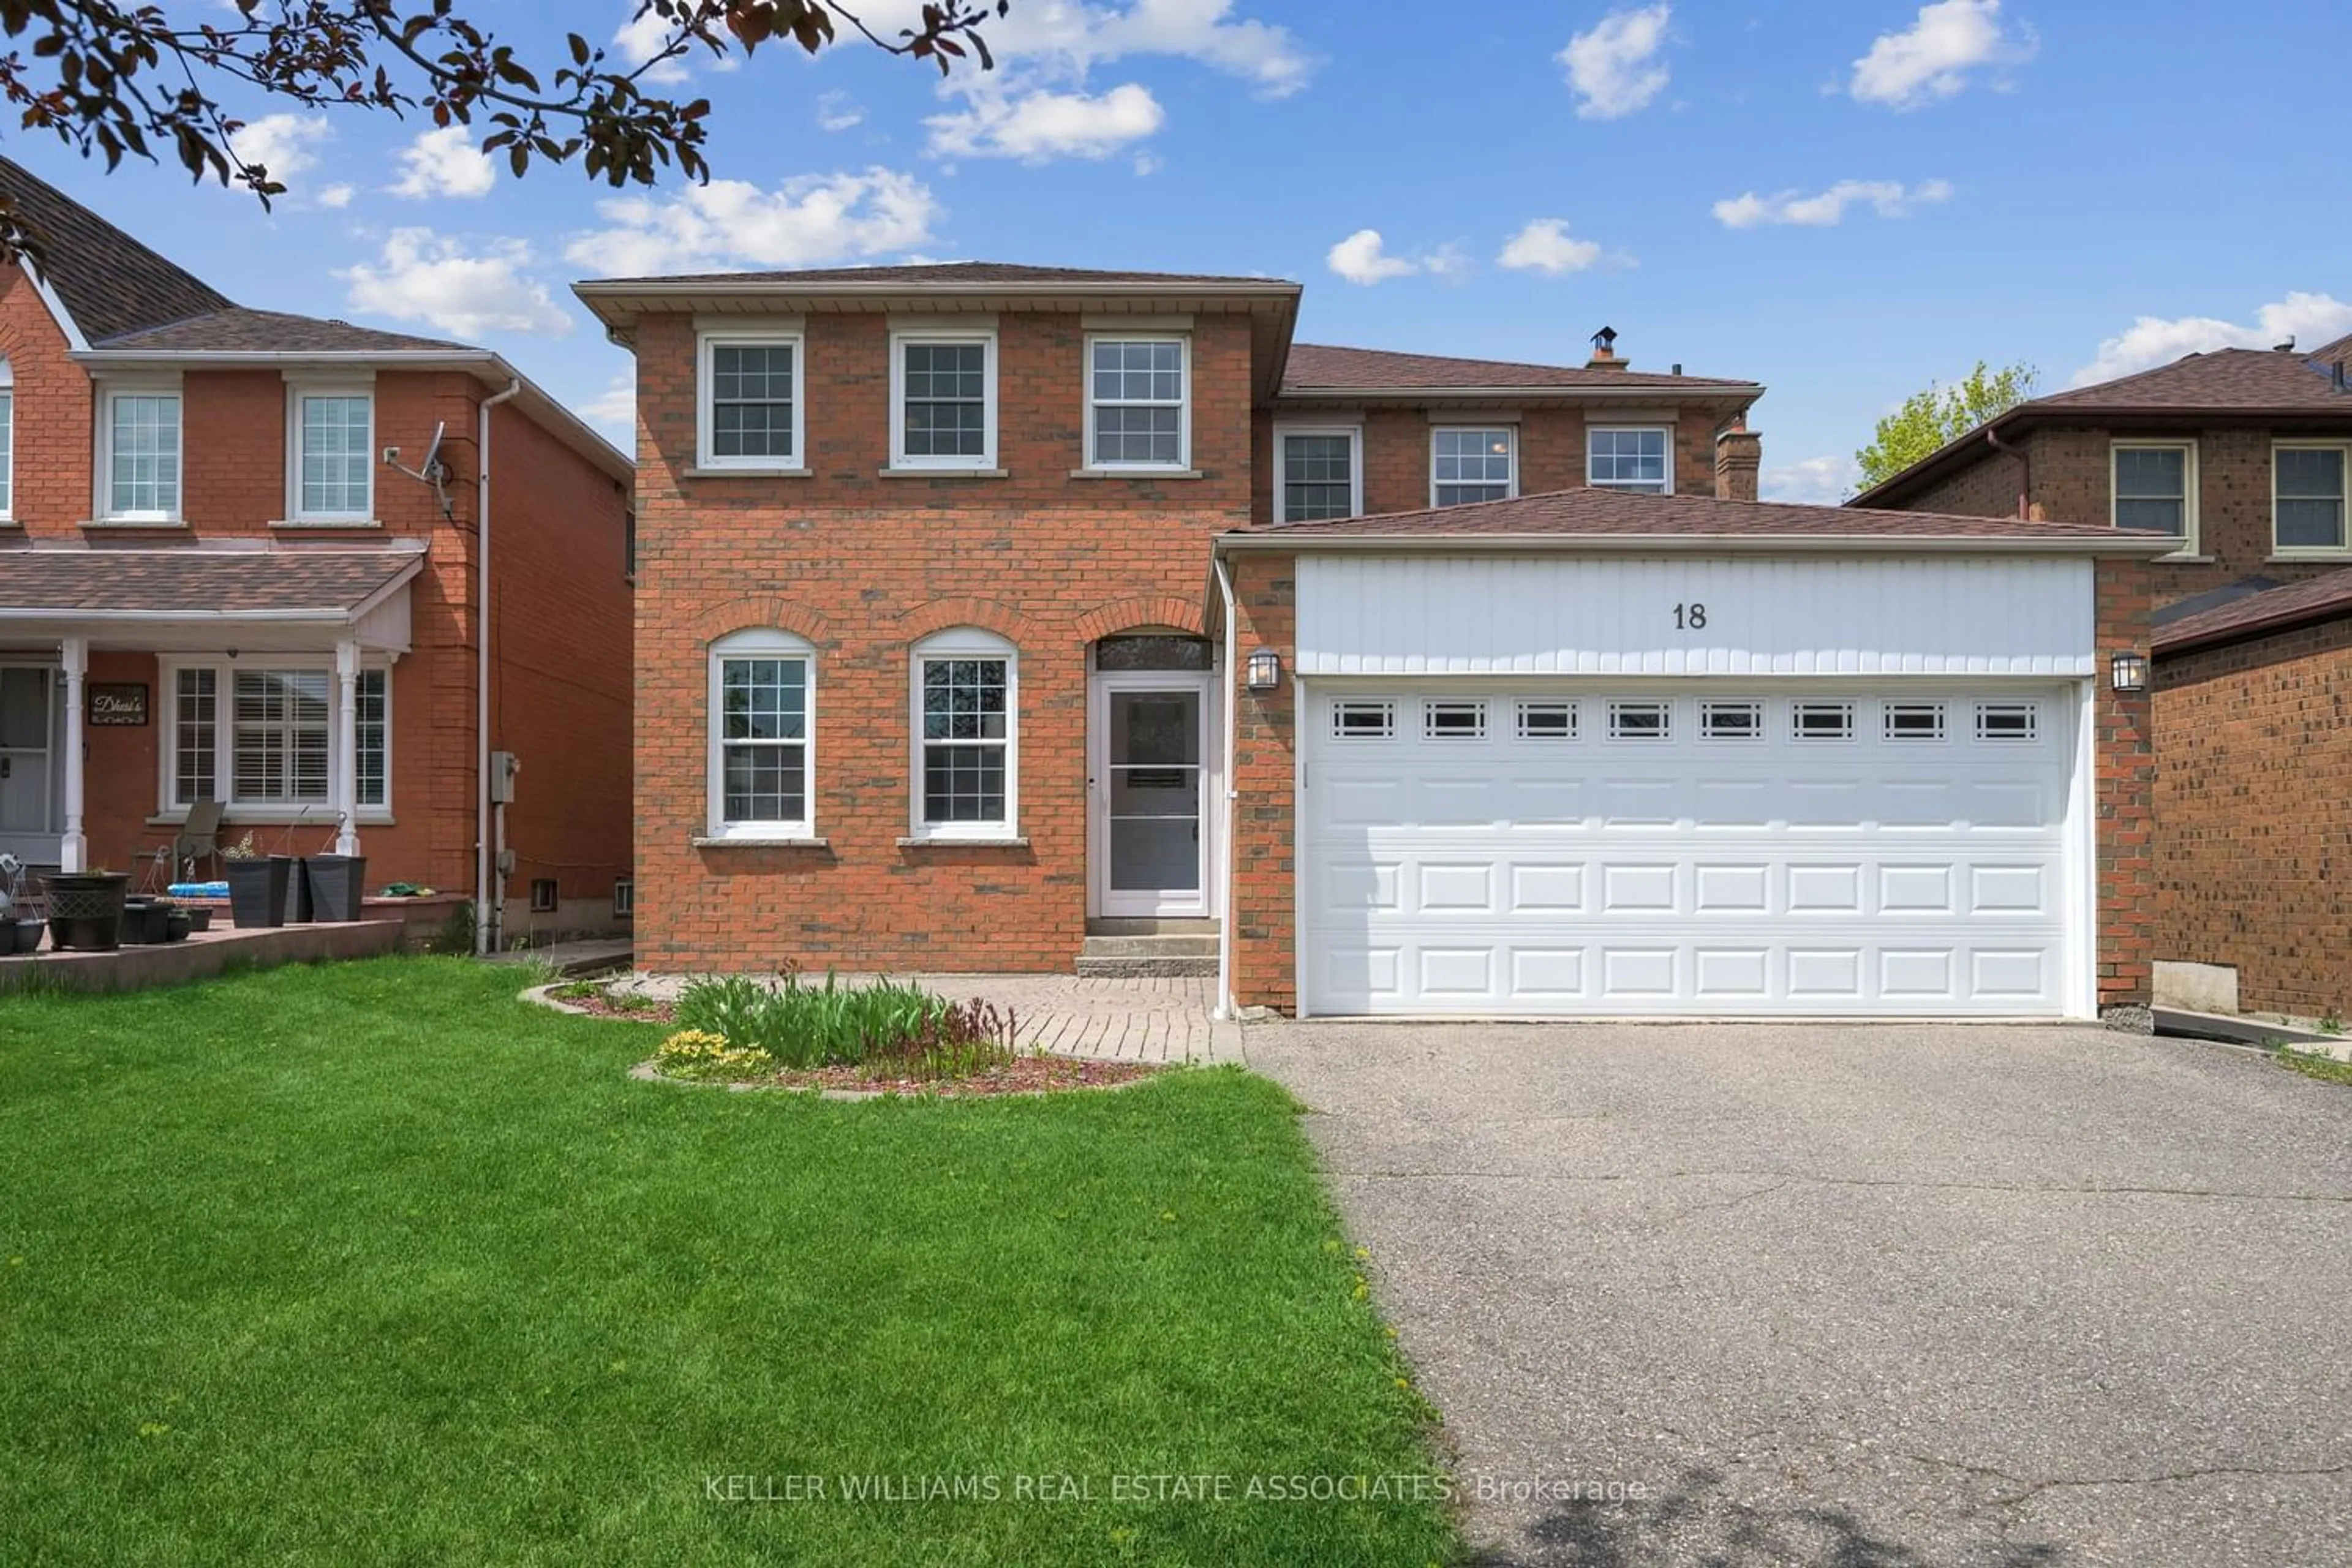 Home with brick exterior material for 18 Napanee St, Brampton Ontario L6S 4X7